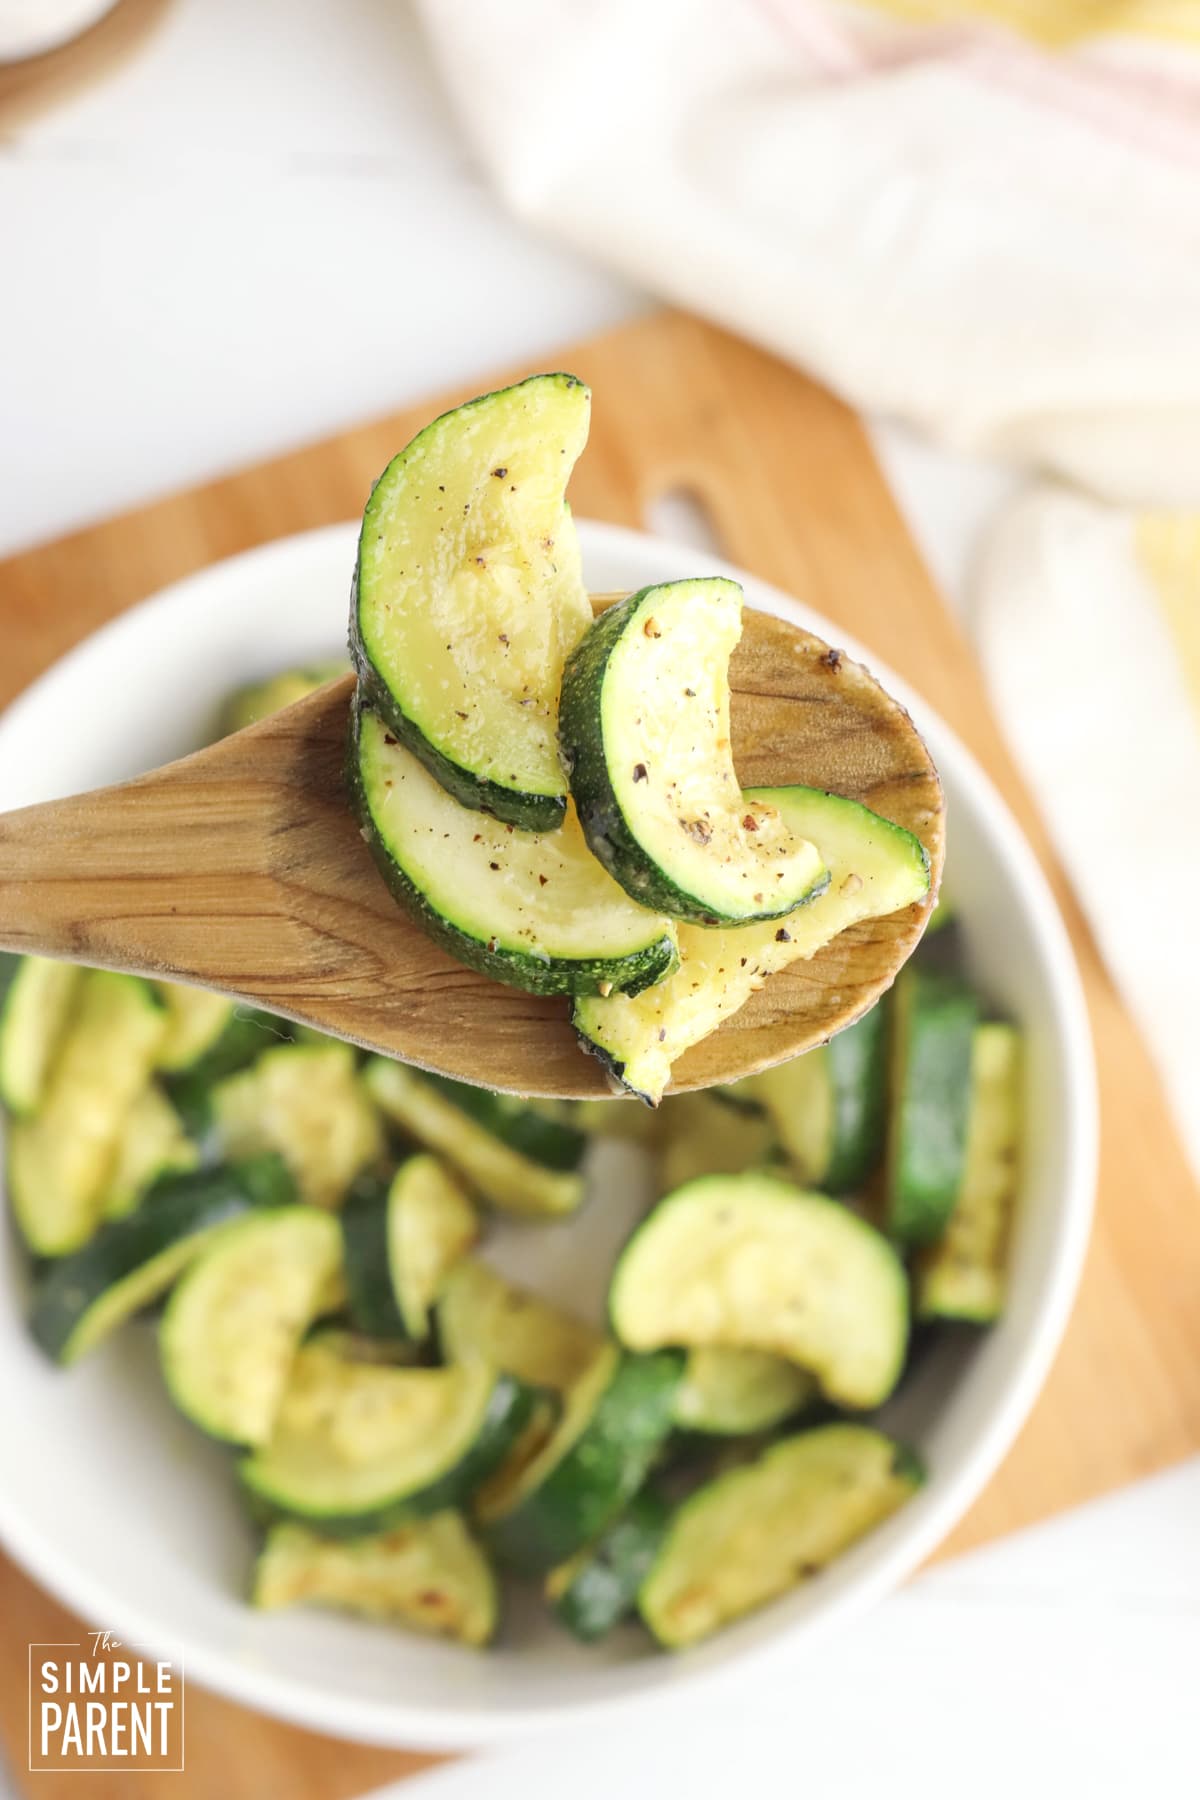 Fried zucchini slices on wooden spoon above white serving bowl